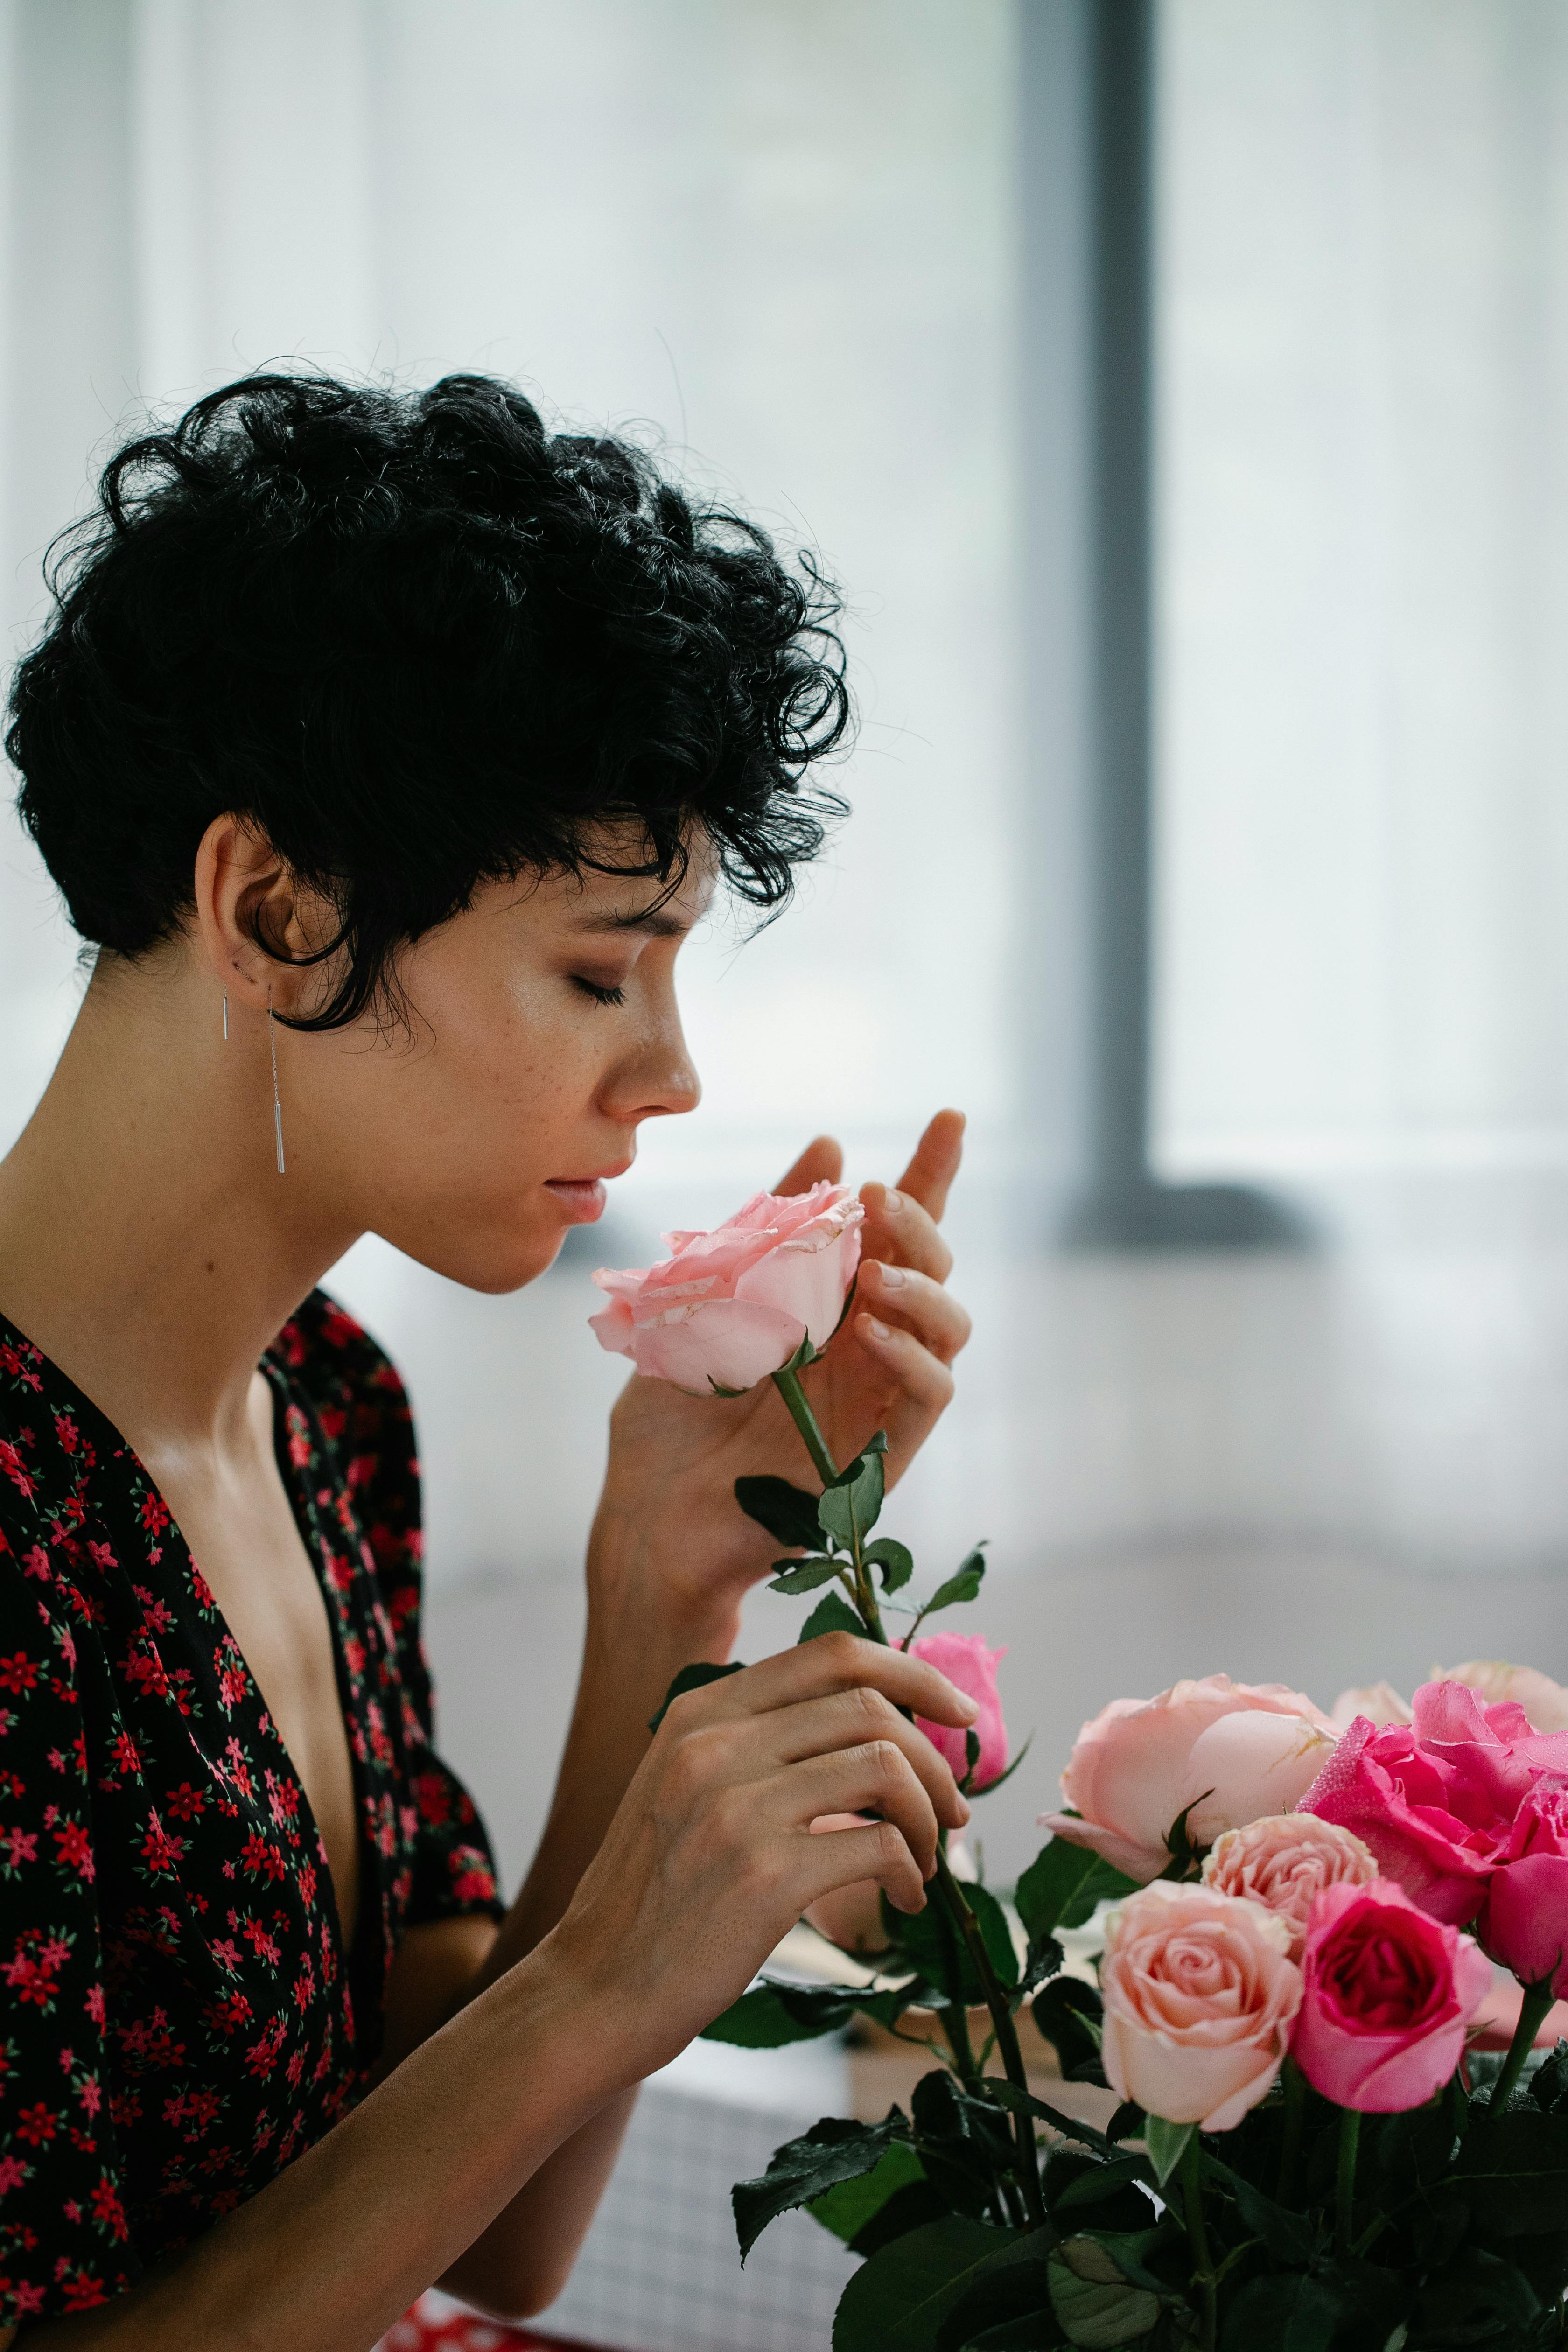 a woman with curly short hair smelling a pink rose